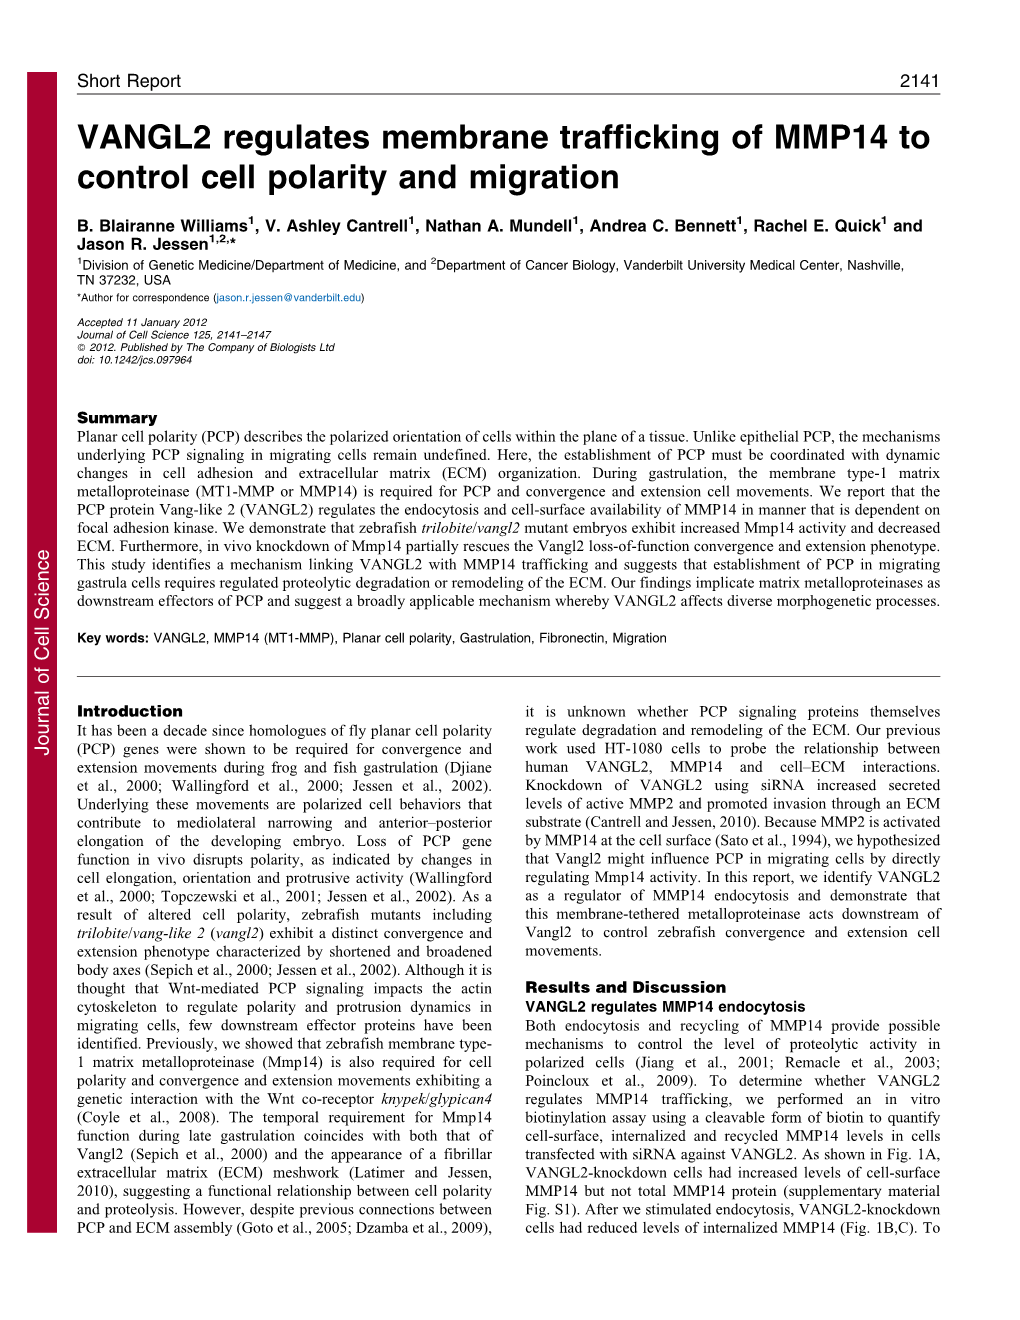 VANGL2 Regulates Membrane Trafficking of MMP14 to Control Cell Polarity and Migration